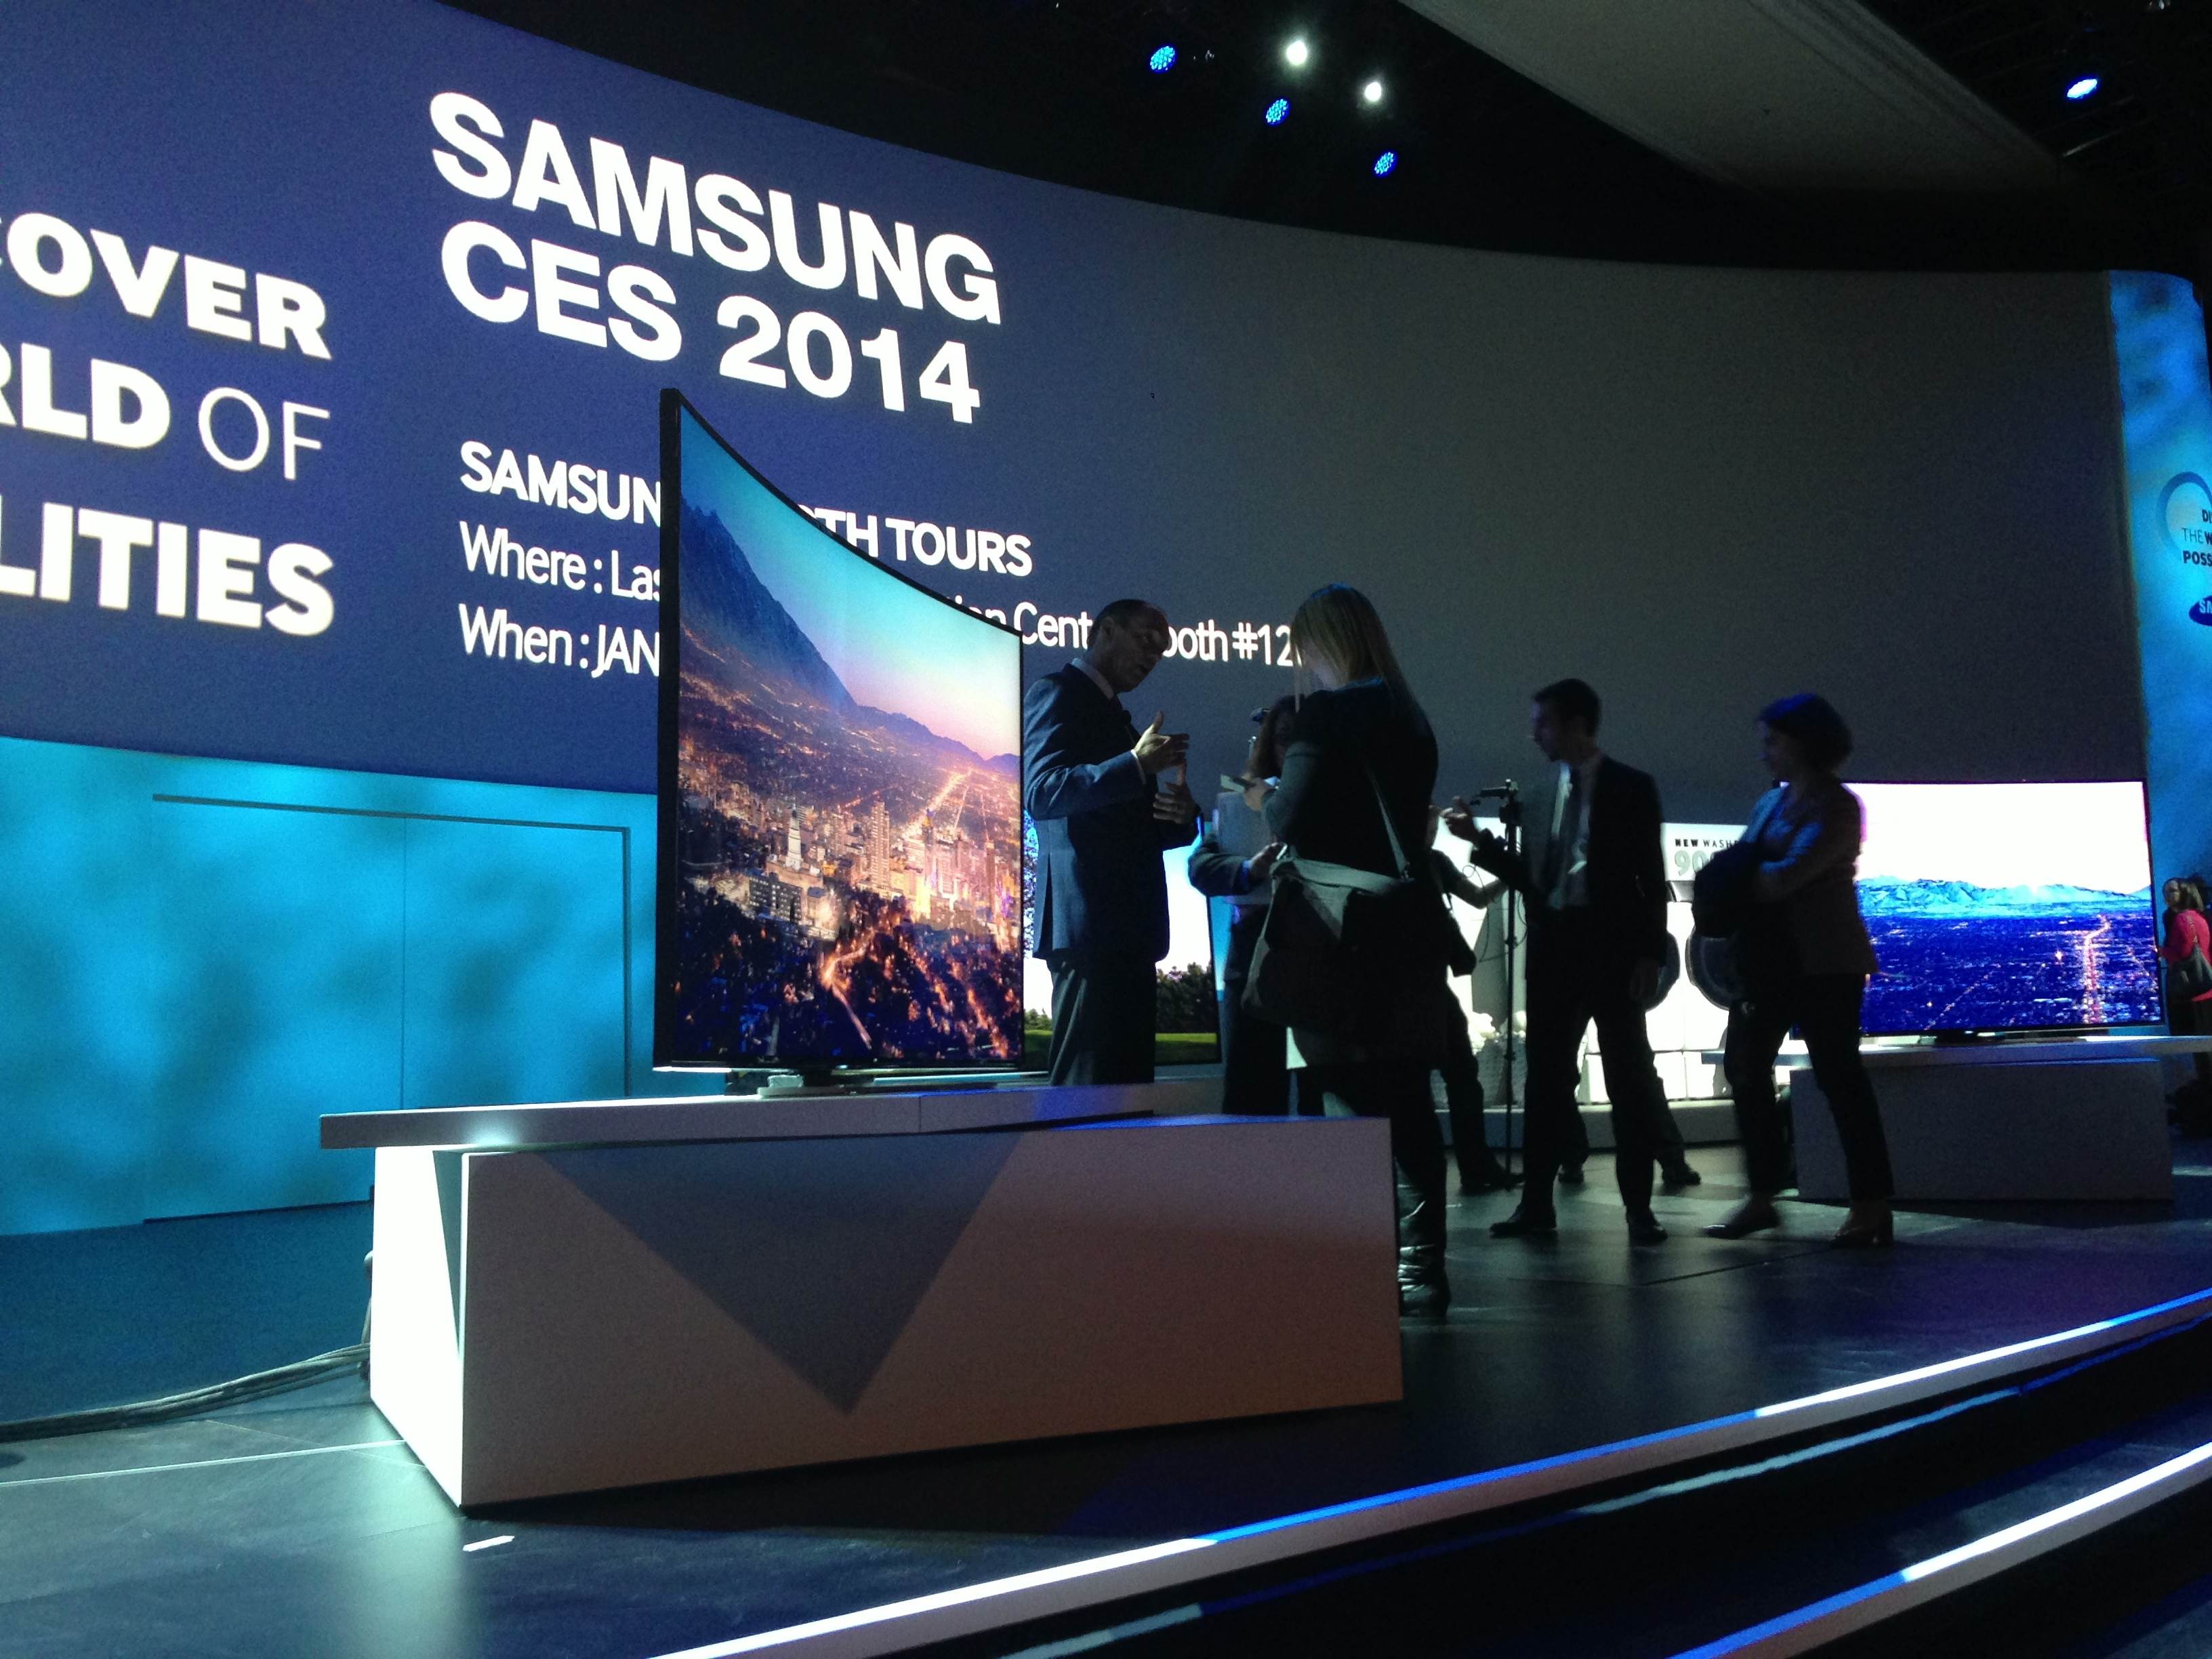 Samsung Pushes Curved TVs, Connected Home Services At CES